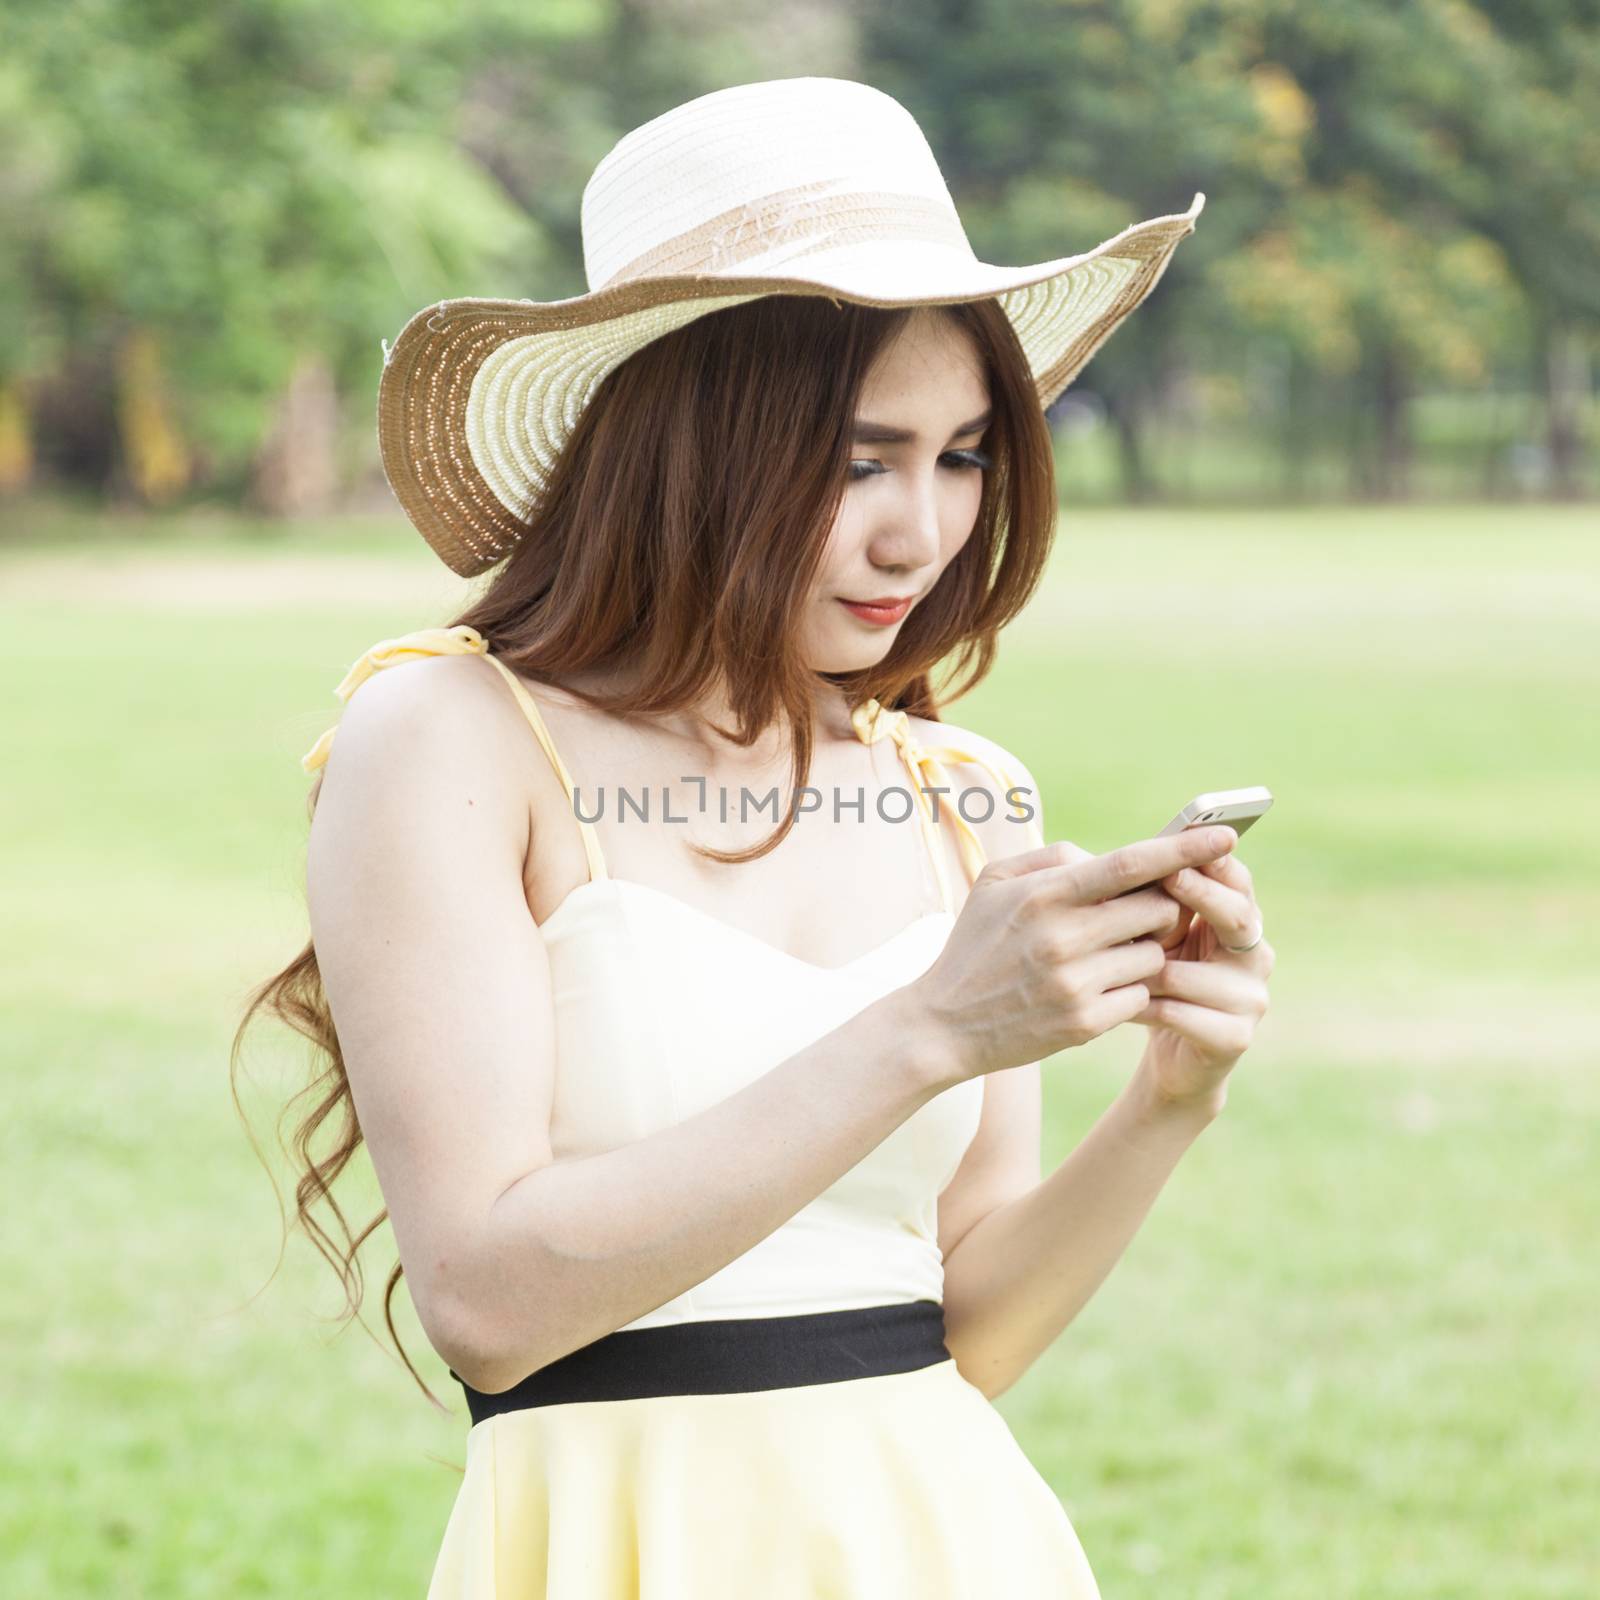 Woman playing smart phone. While on the lawn in the park.